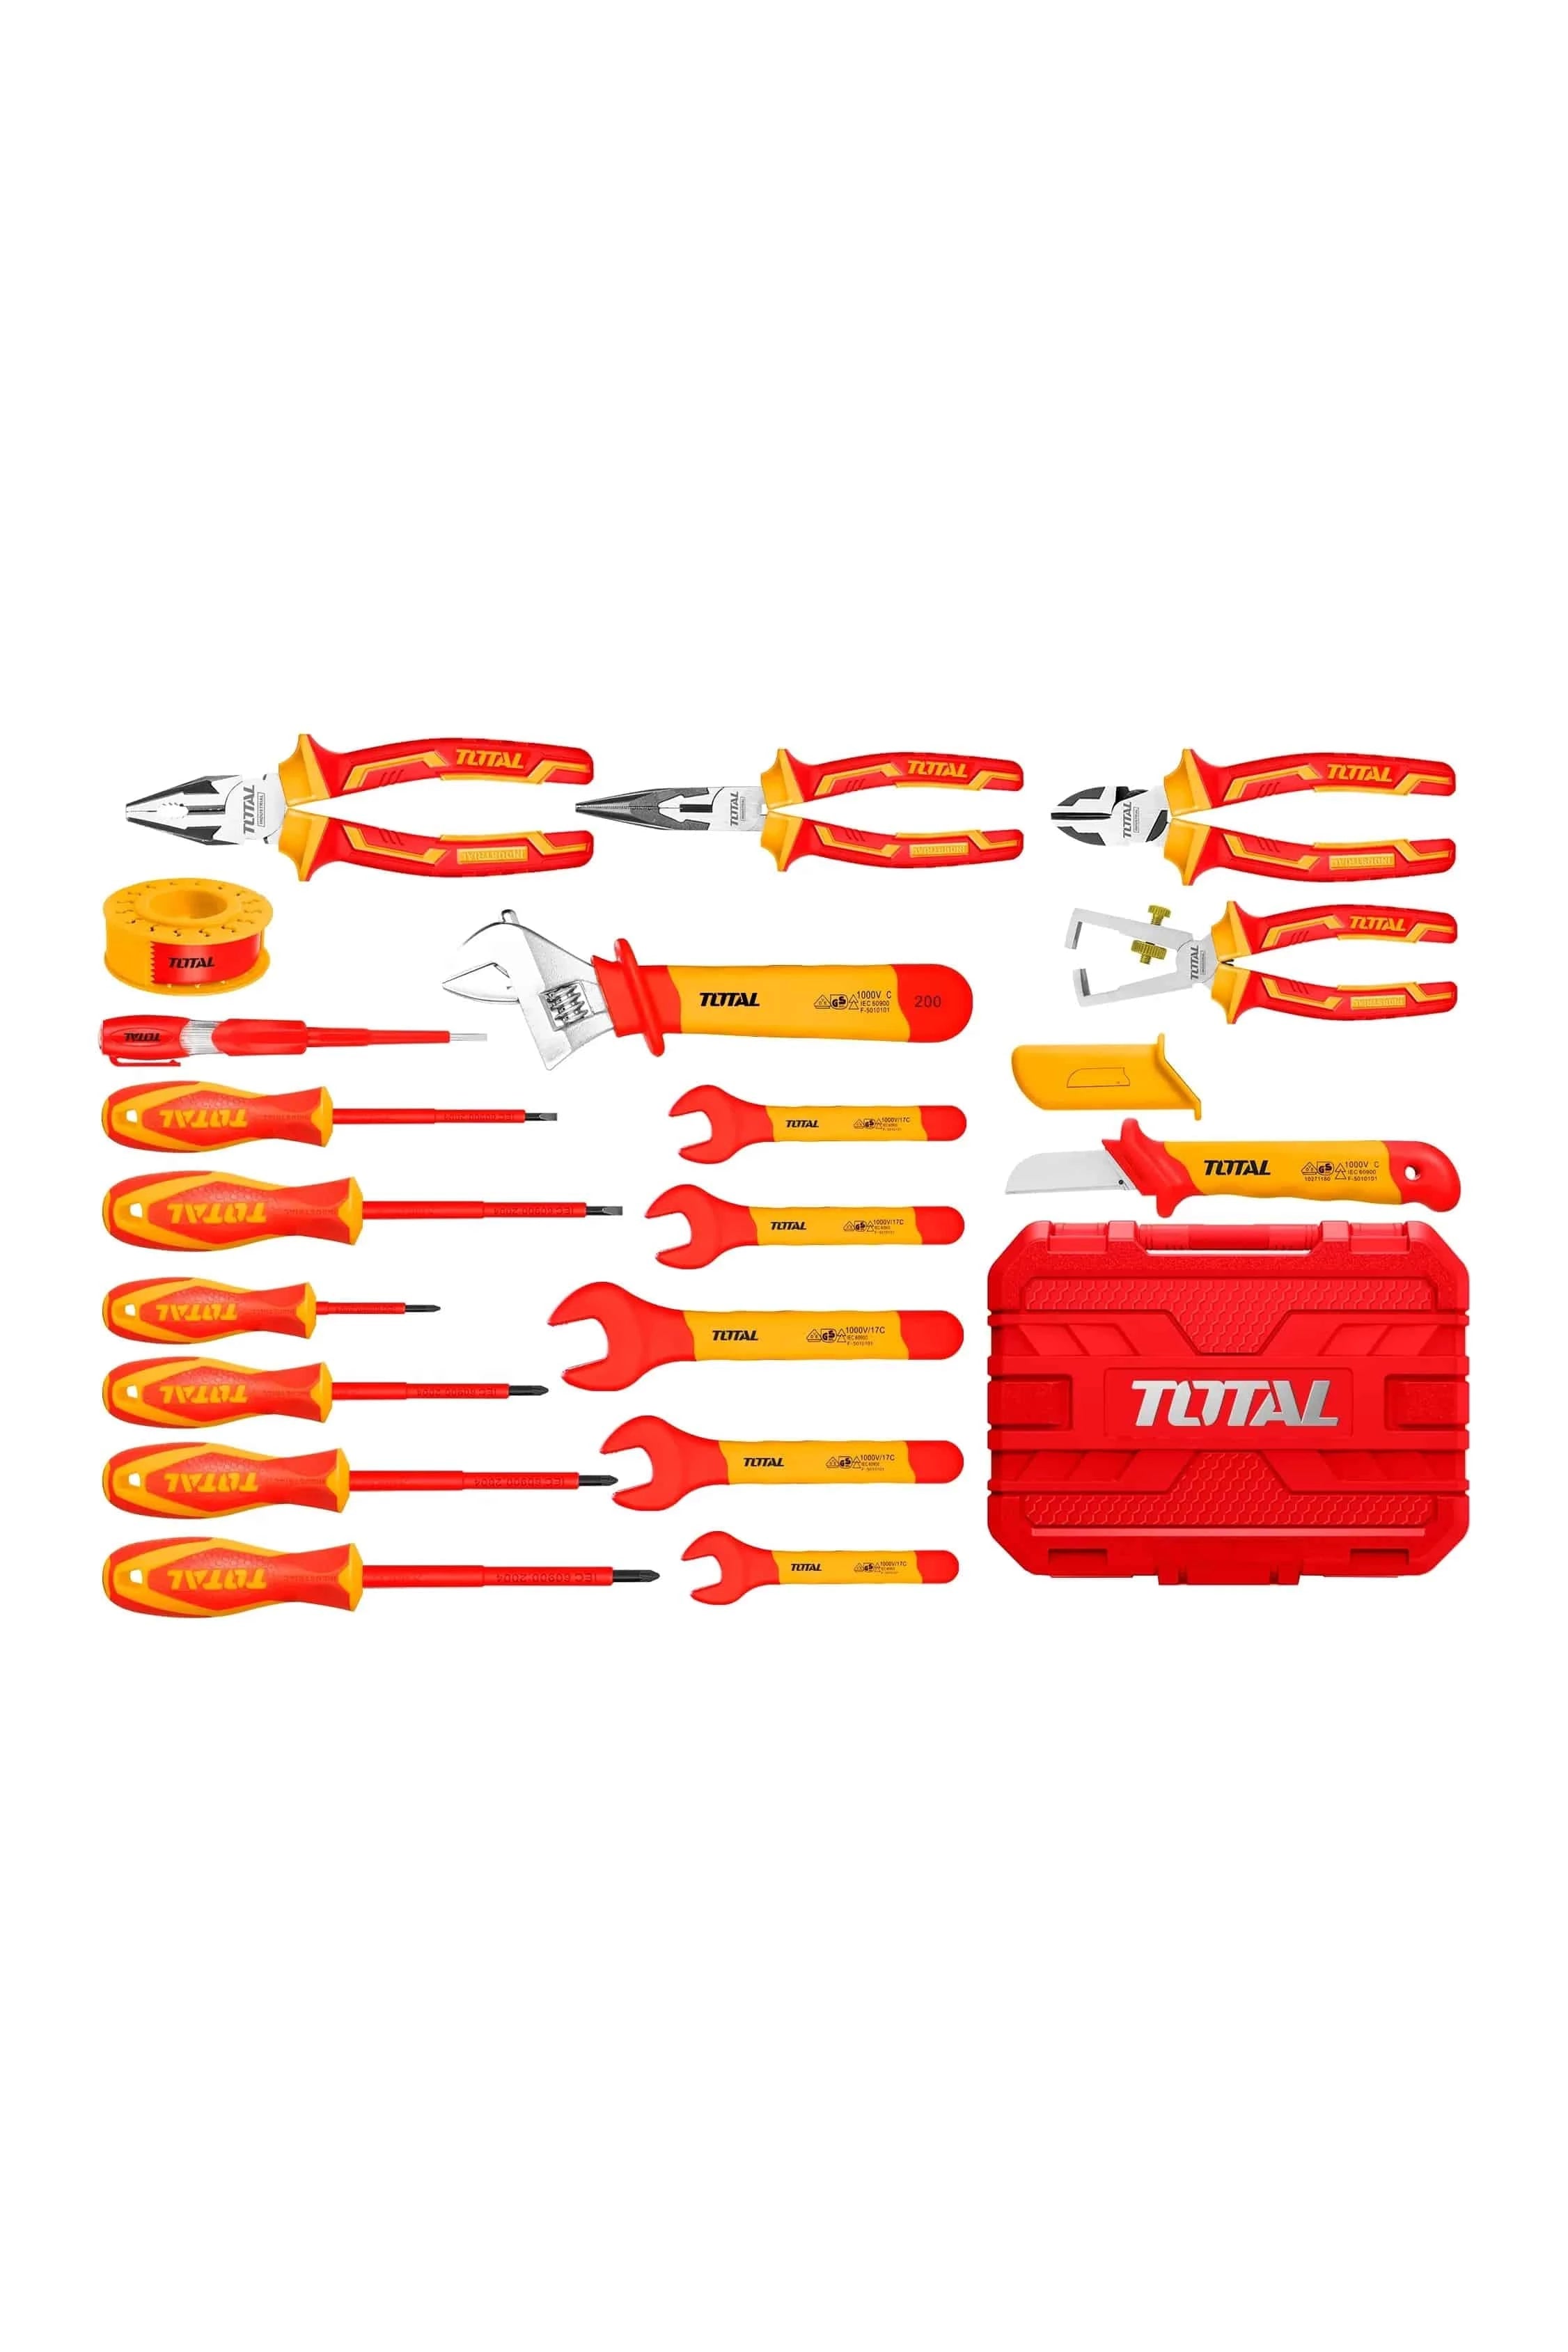 TOTAL INSULATED HAND TOOLS SET 19 PIECES - Elite Renewable Solutions